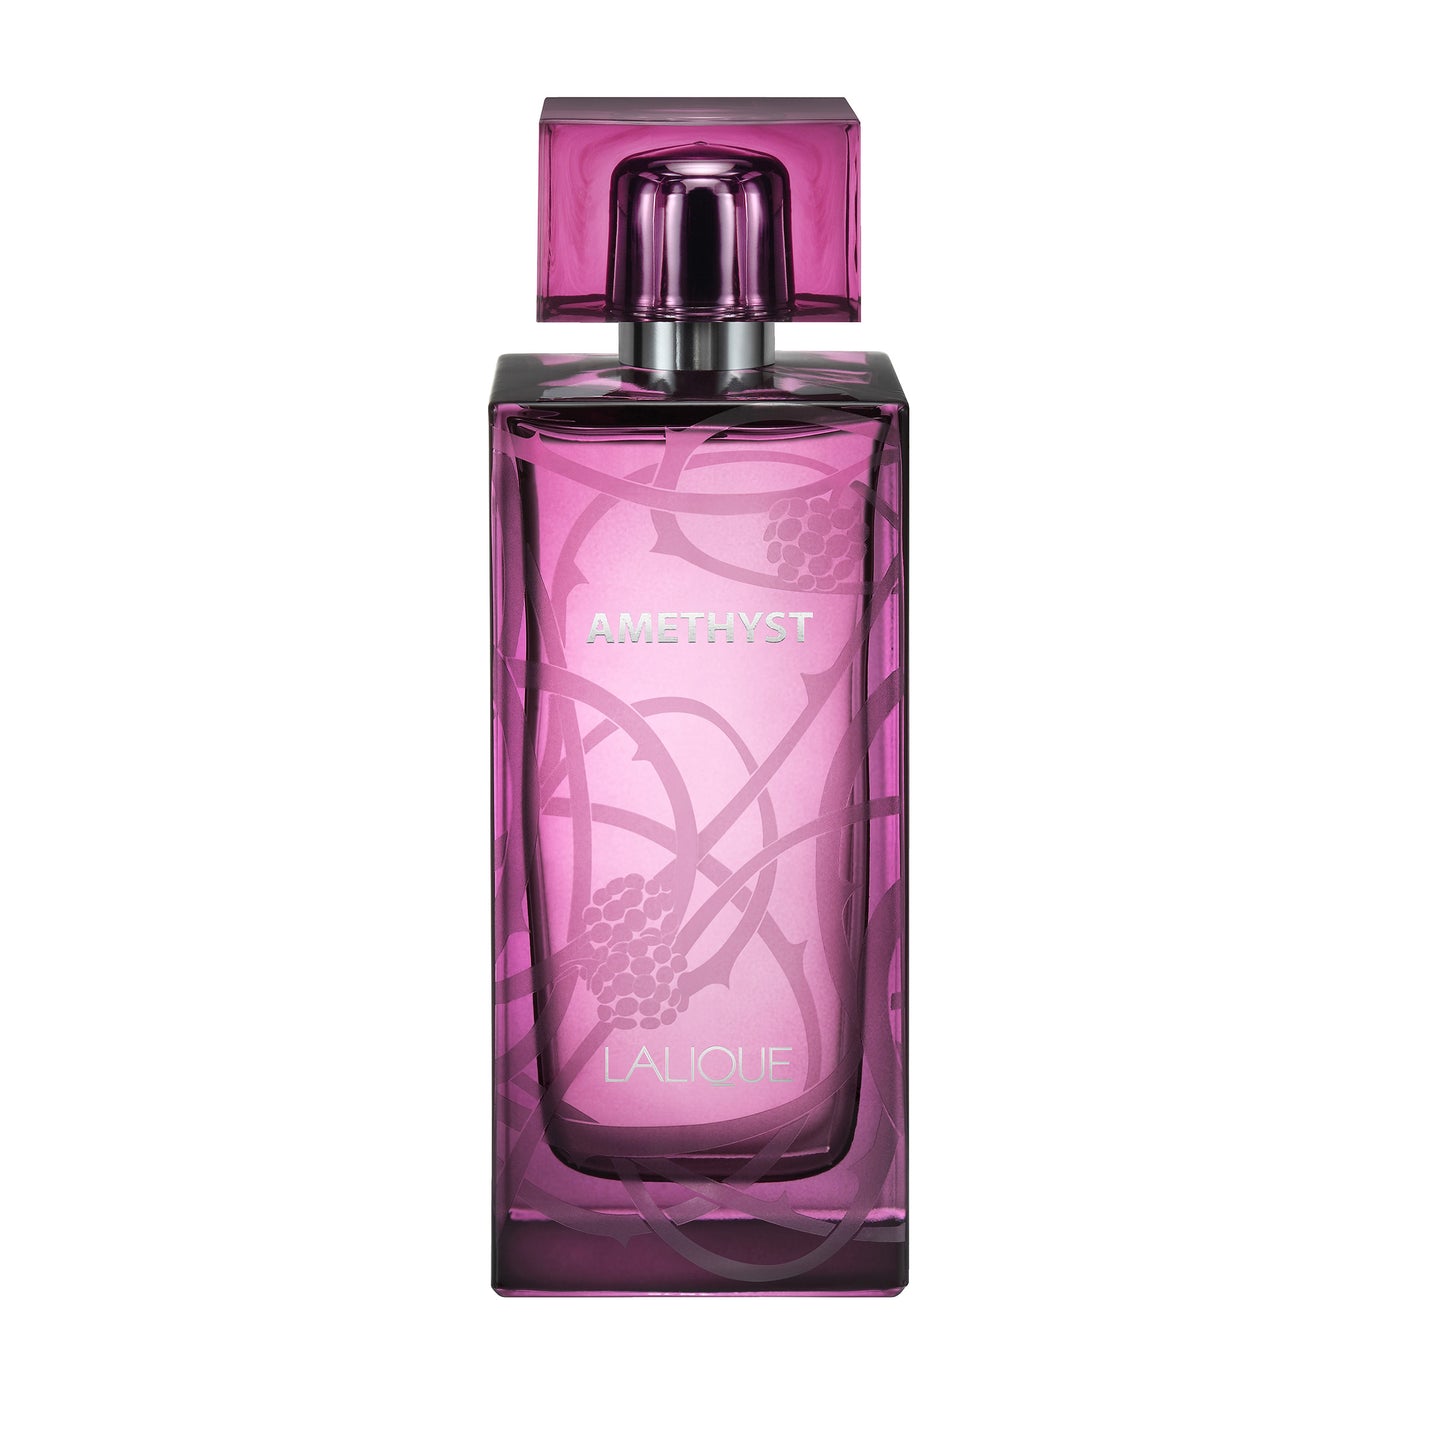 LALIQUE AMETHYST EDP 100ML - EASTERN SCENT